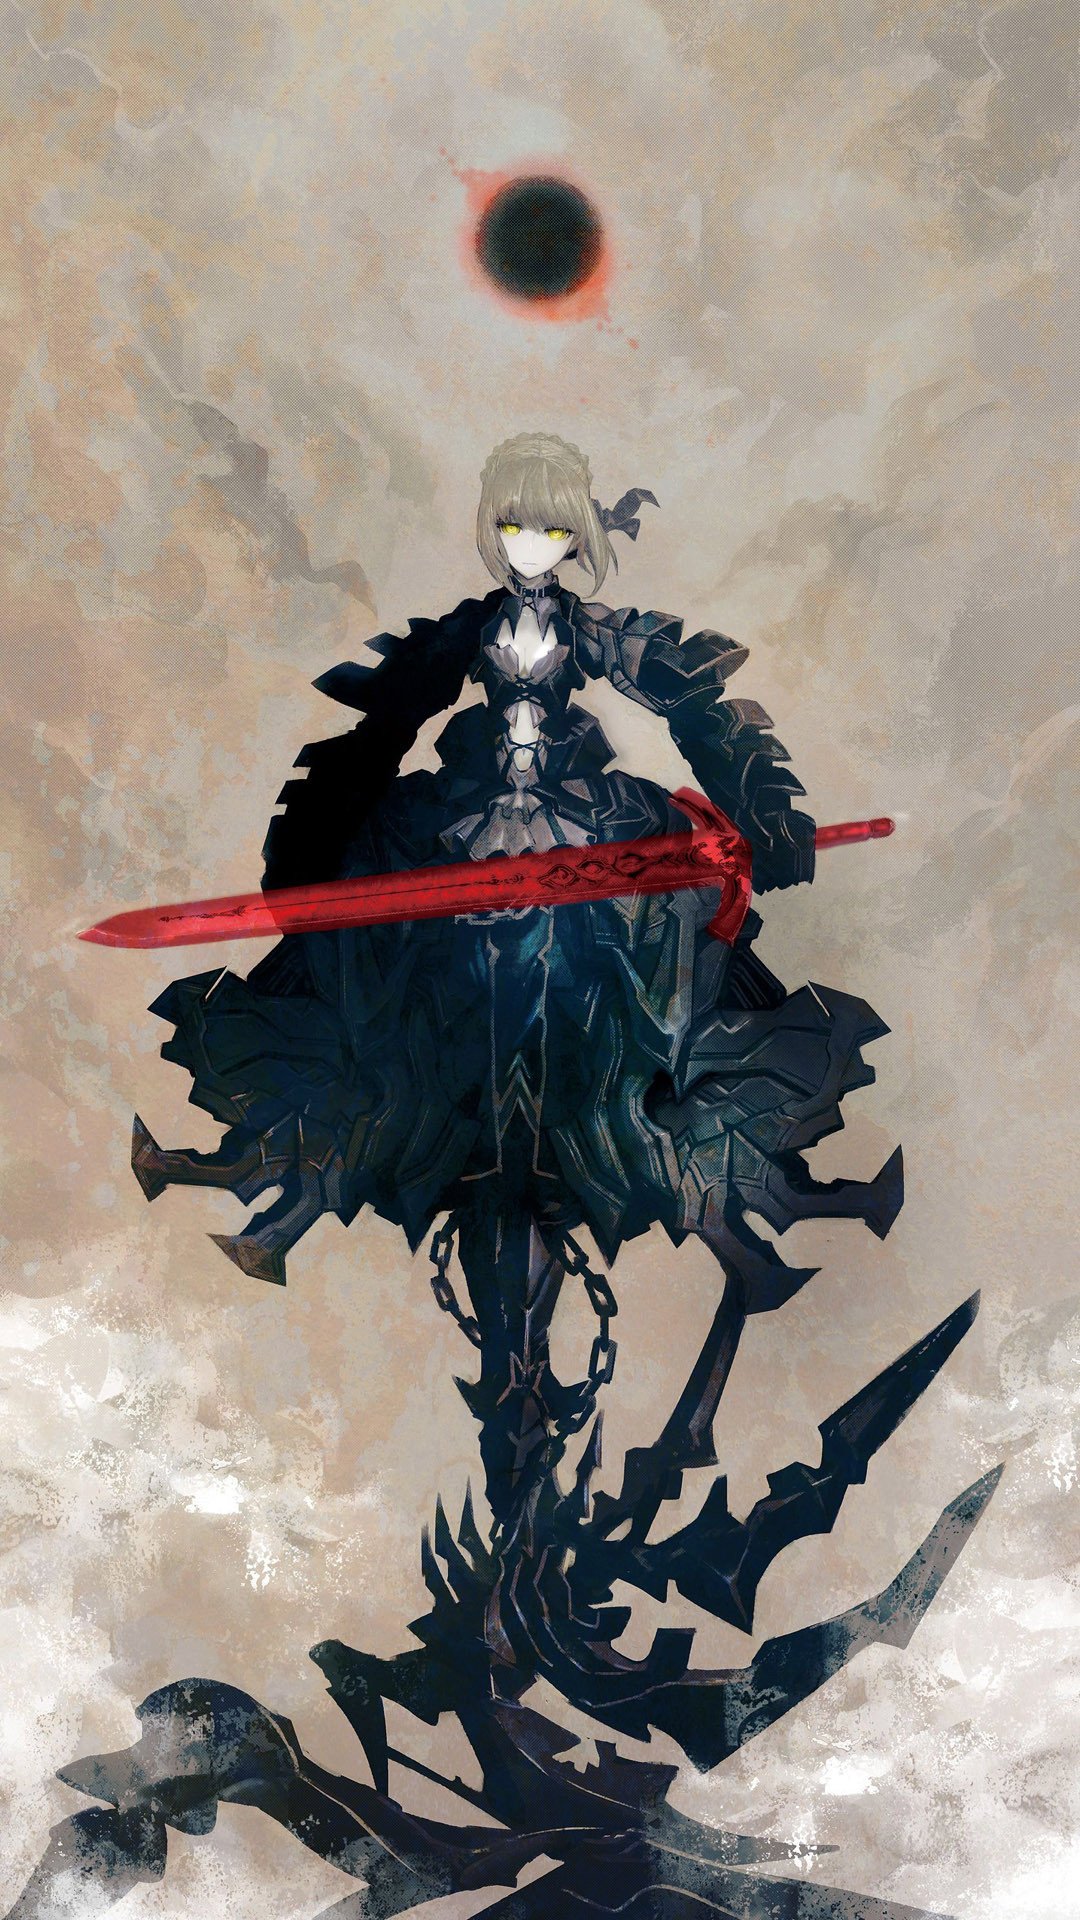 1080x1920 ... Saber Alter - Fate Stay Night Anime mobile wallpaper